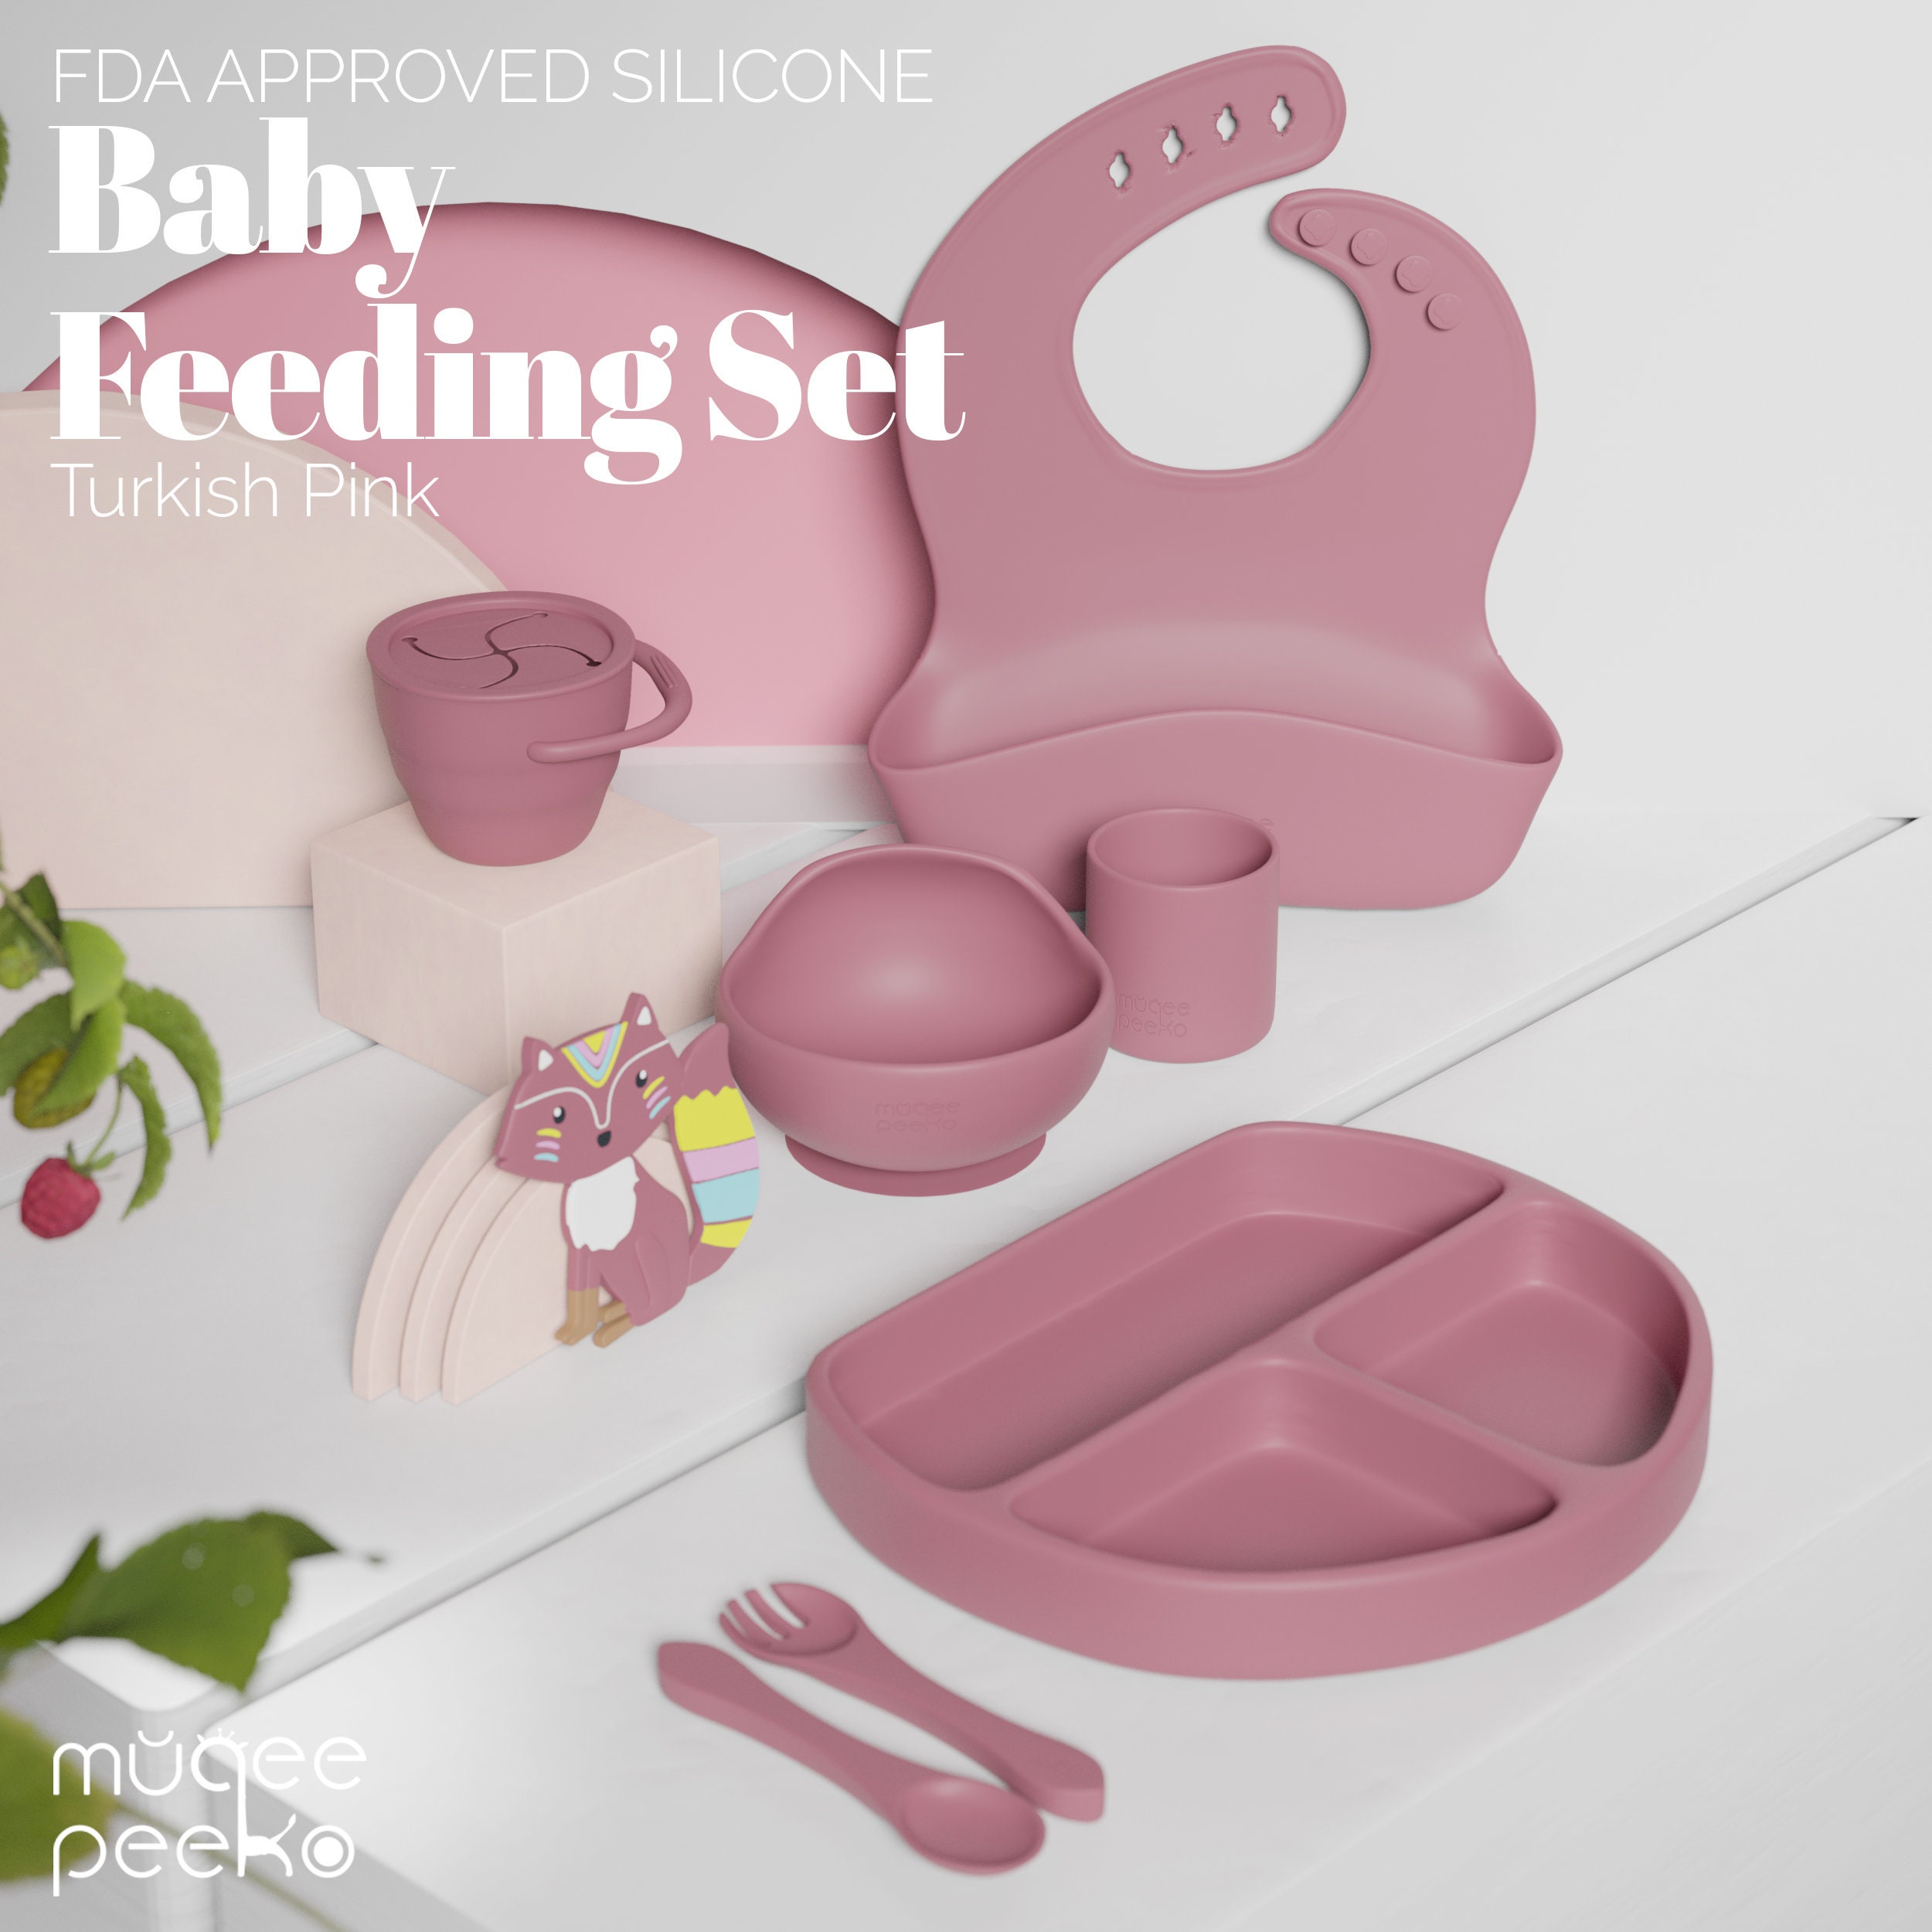 9pcs Baby Feeding Setweaning Starter Set Includes Suction Bowls